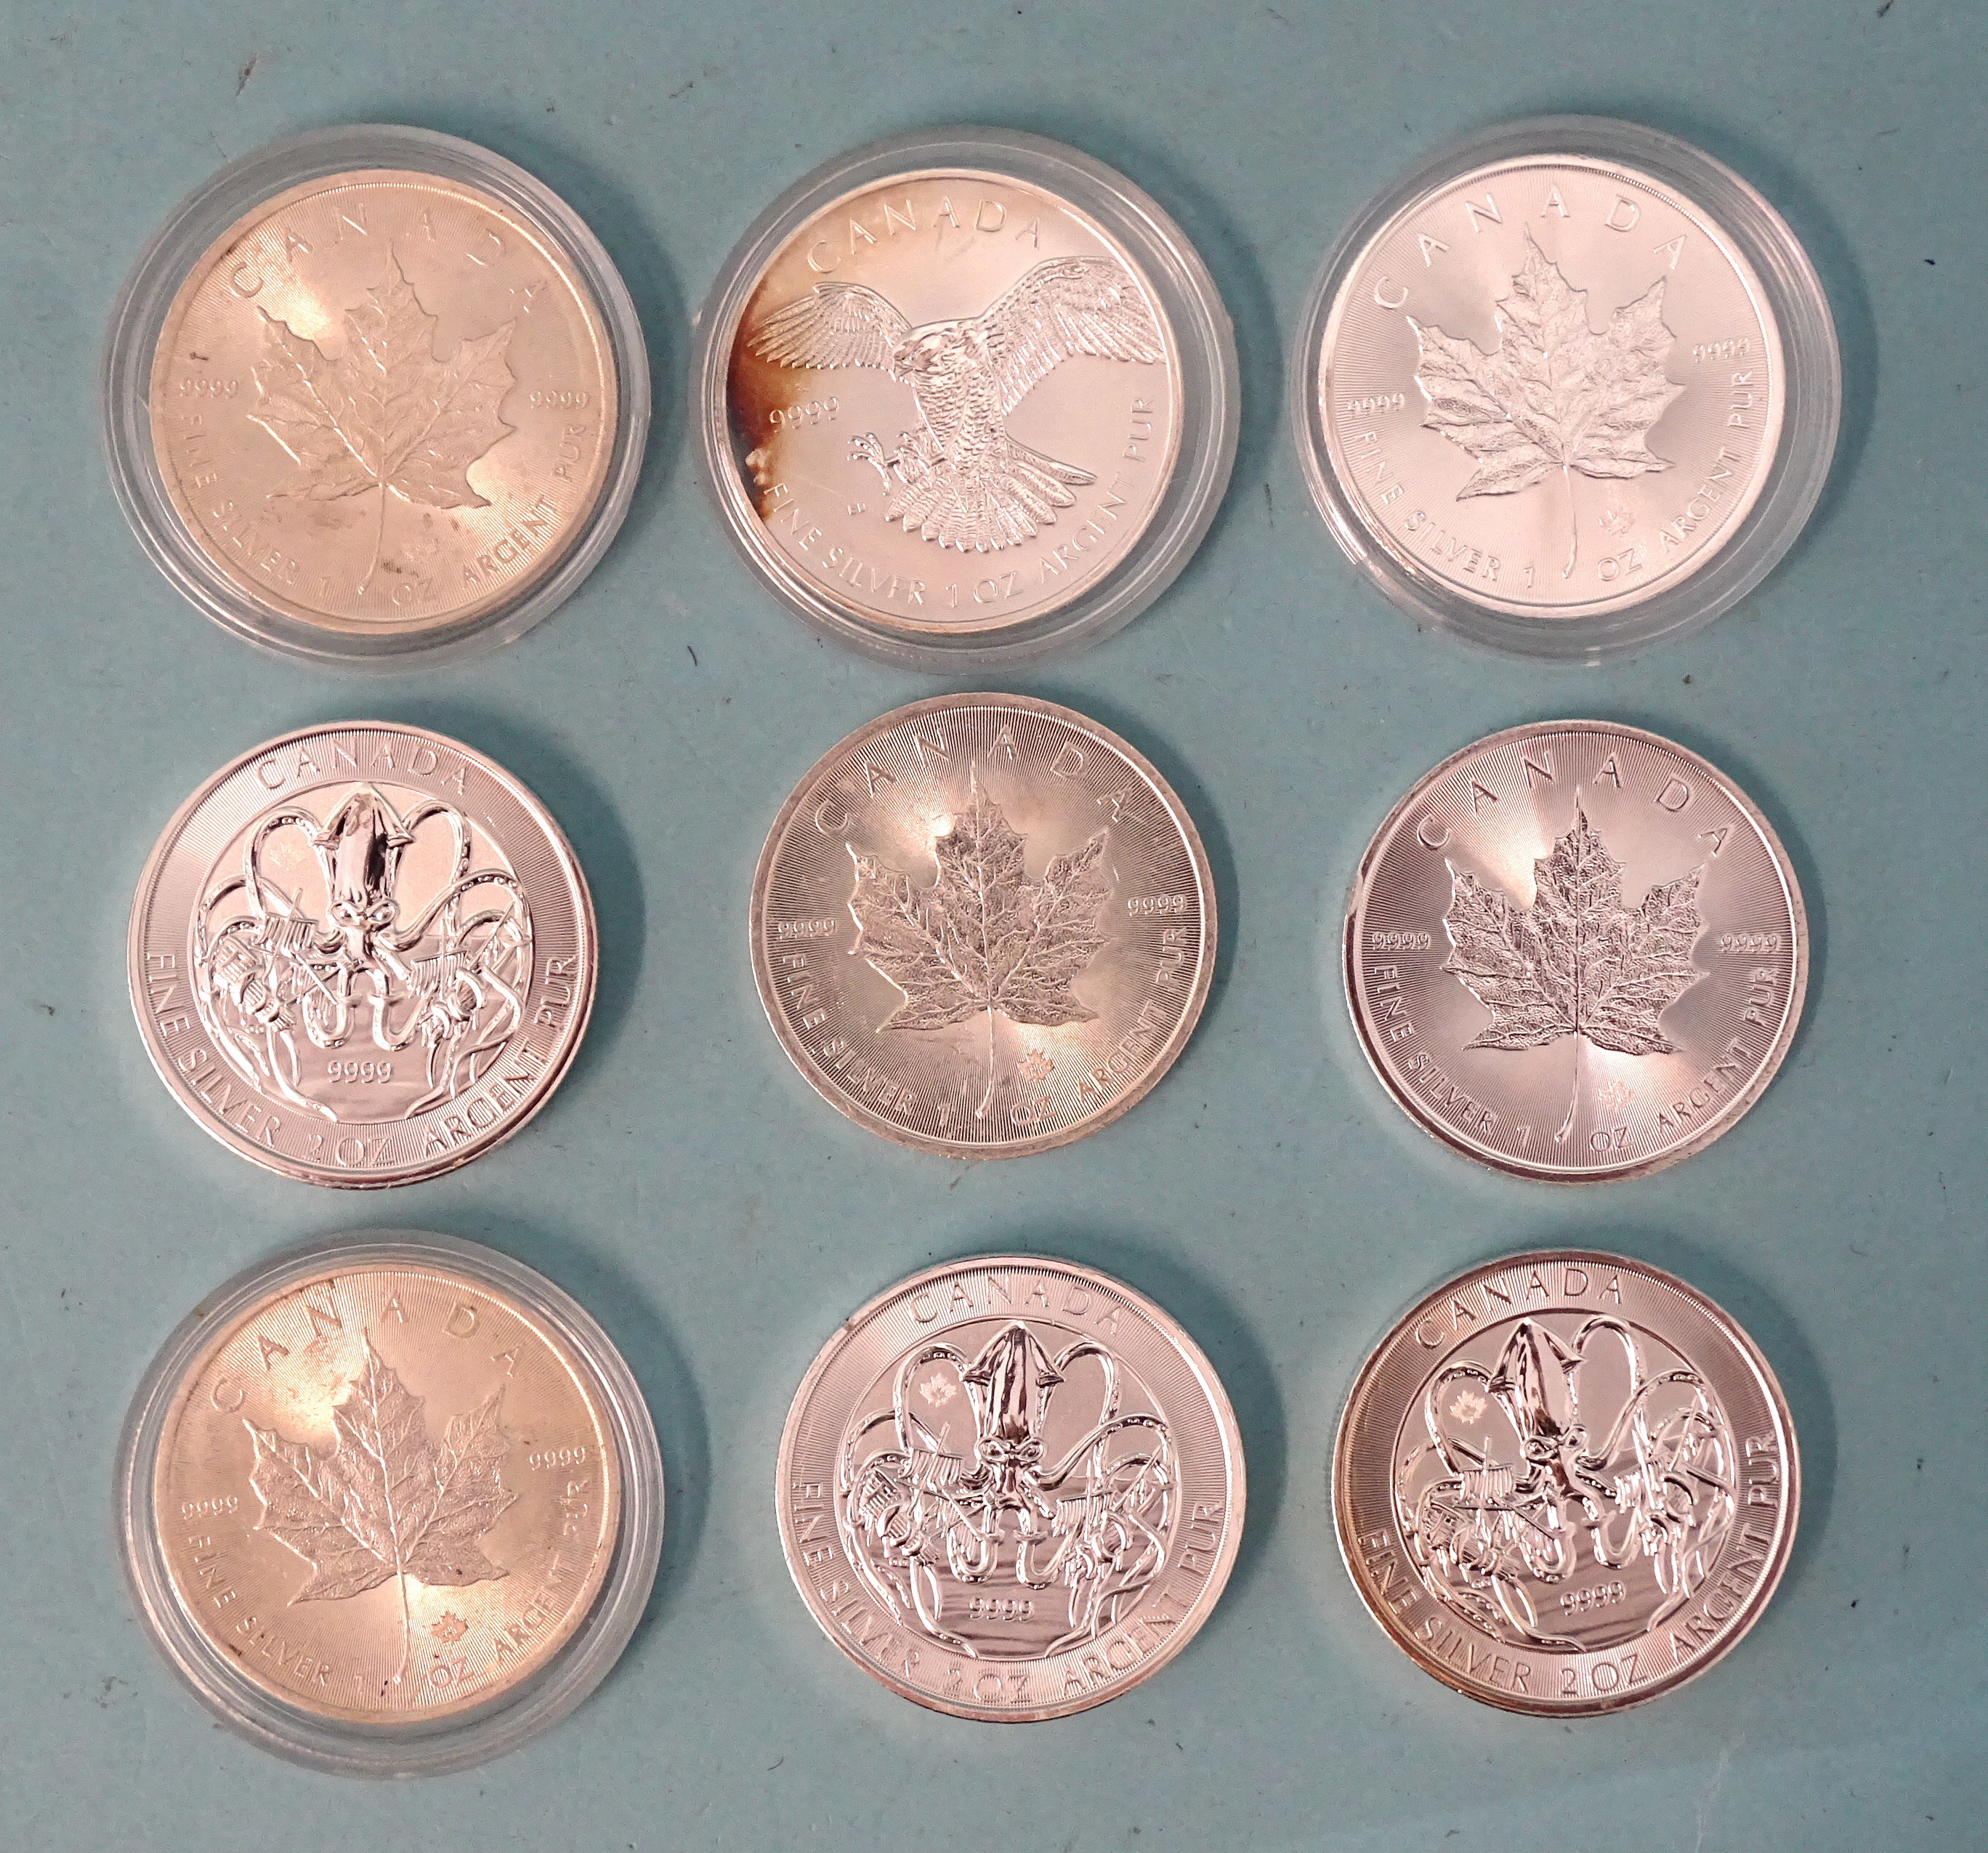 A collection of nine Canada silver bullion coins: three 'The Kraken' ten-dollar coins and six 'Maple